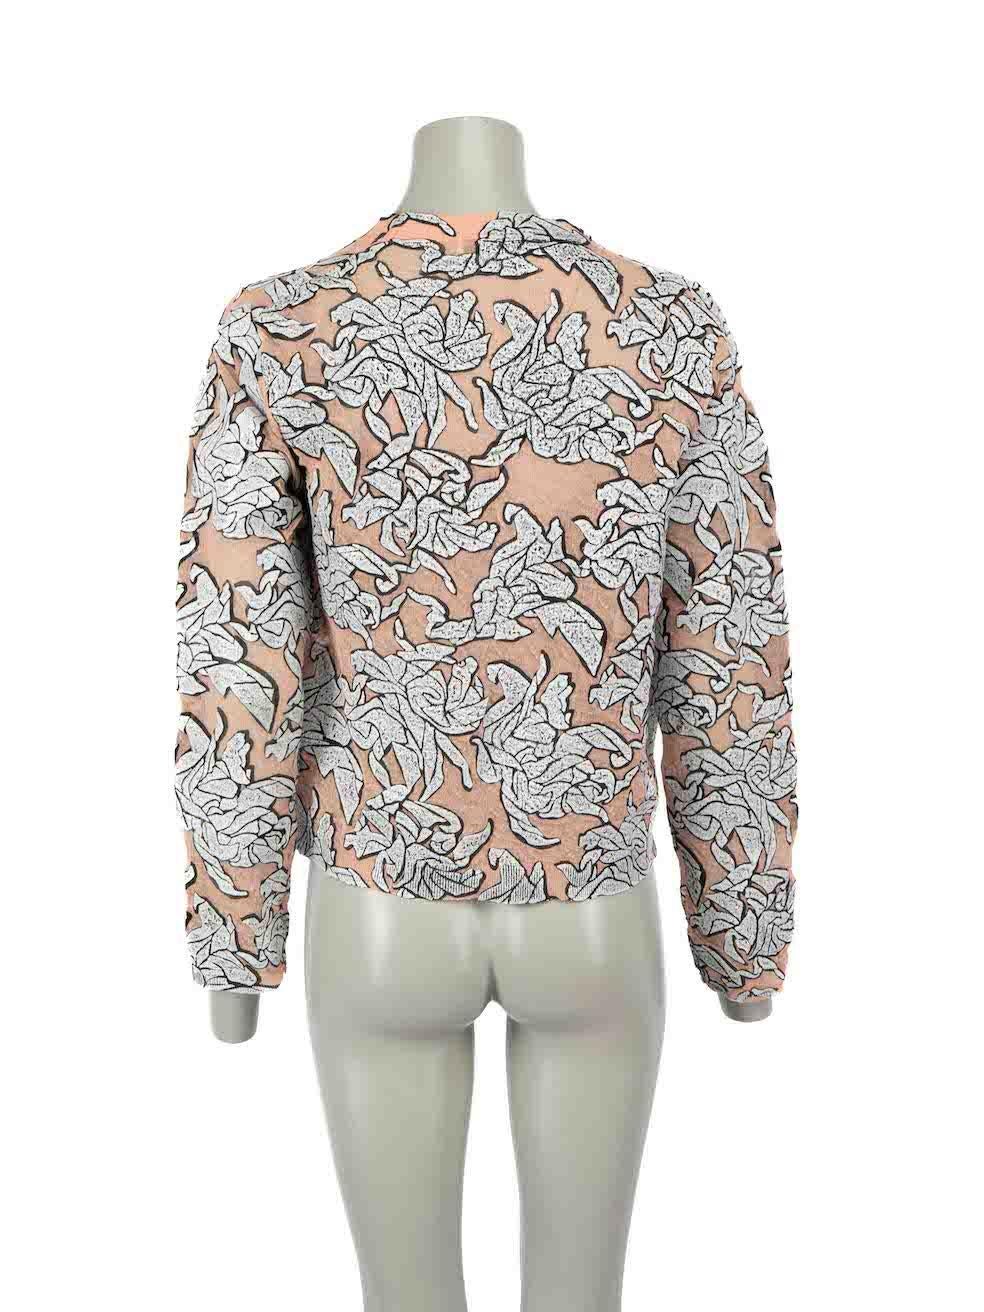 Balenciaga Floral Print Knit Cropped Cardigan Size M In Good Condition In London, GB